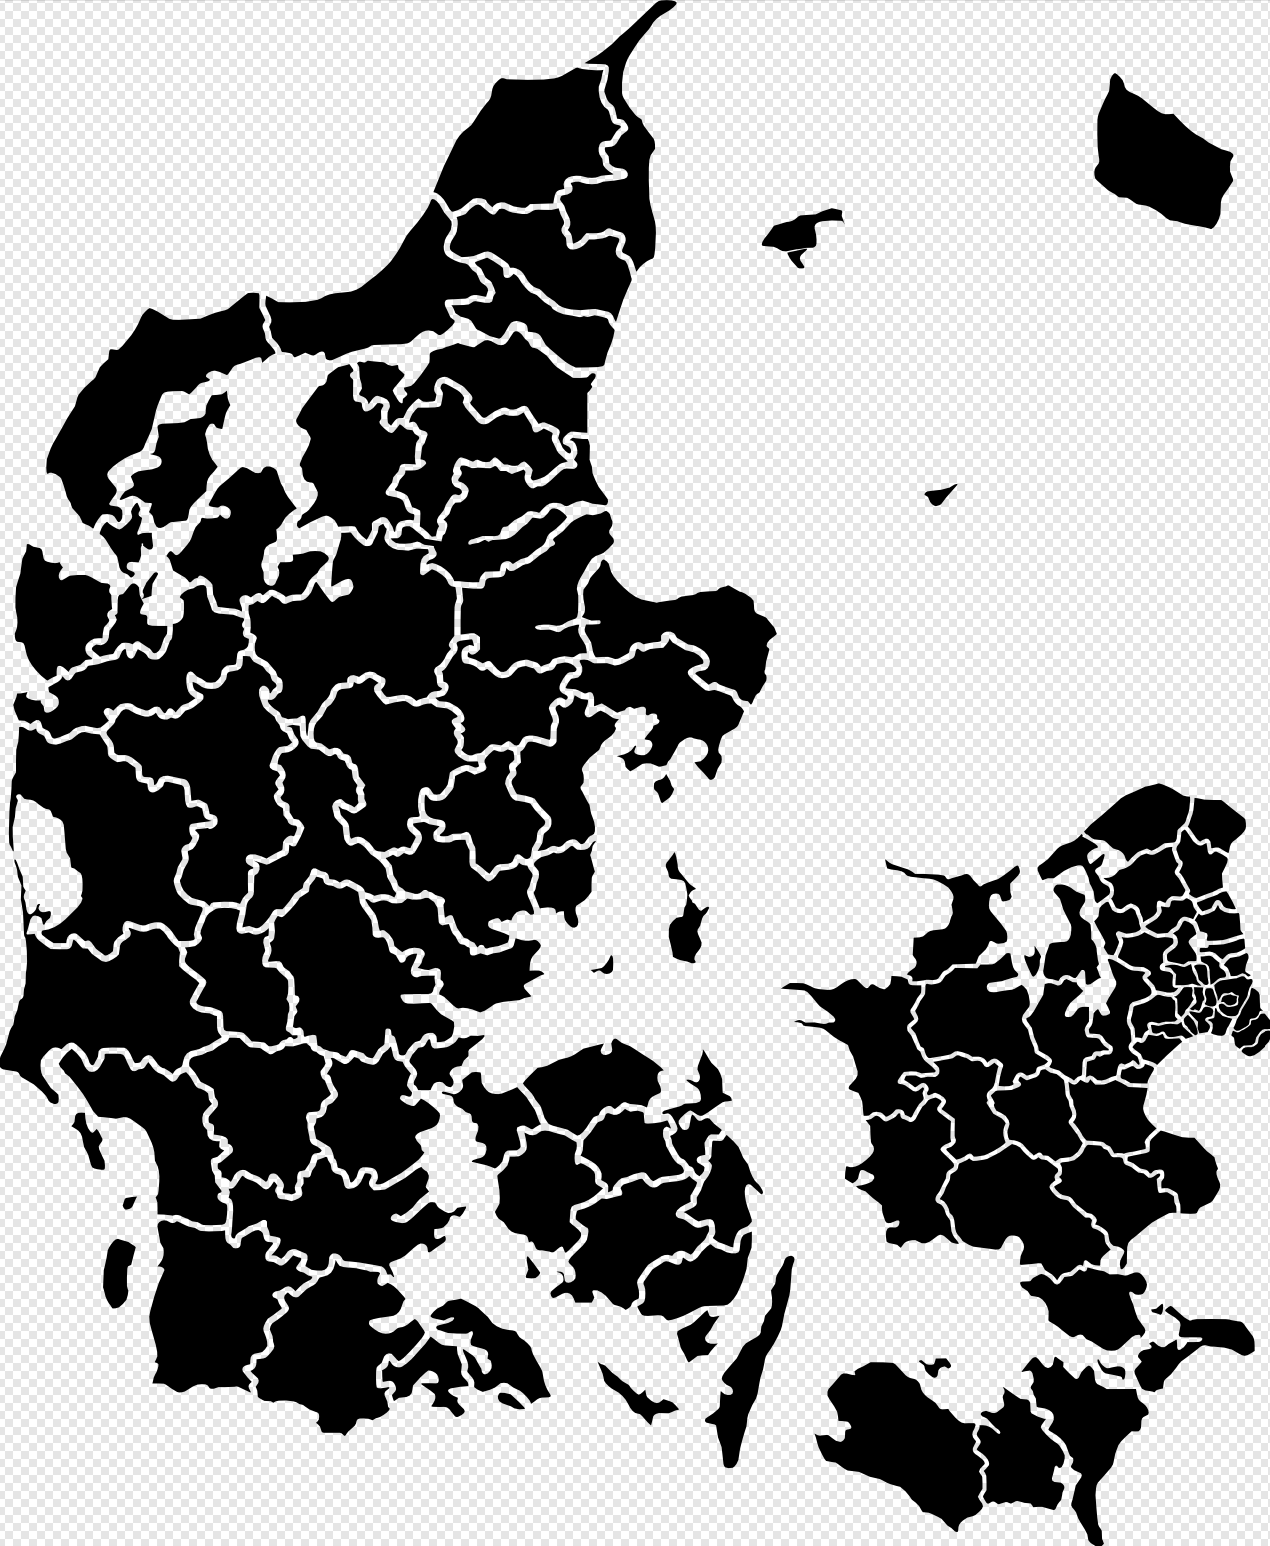 SVG of Denmark with municipalities